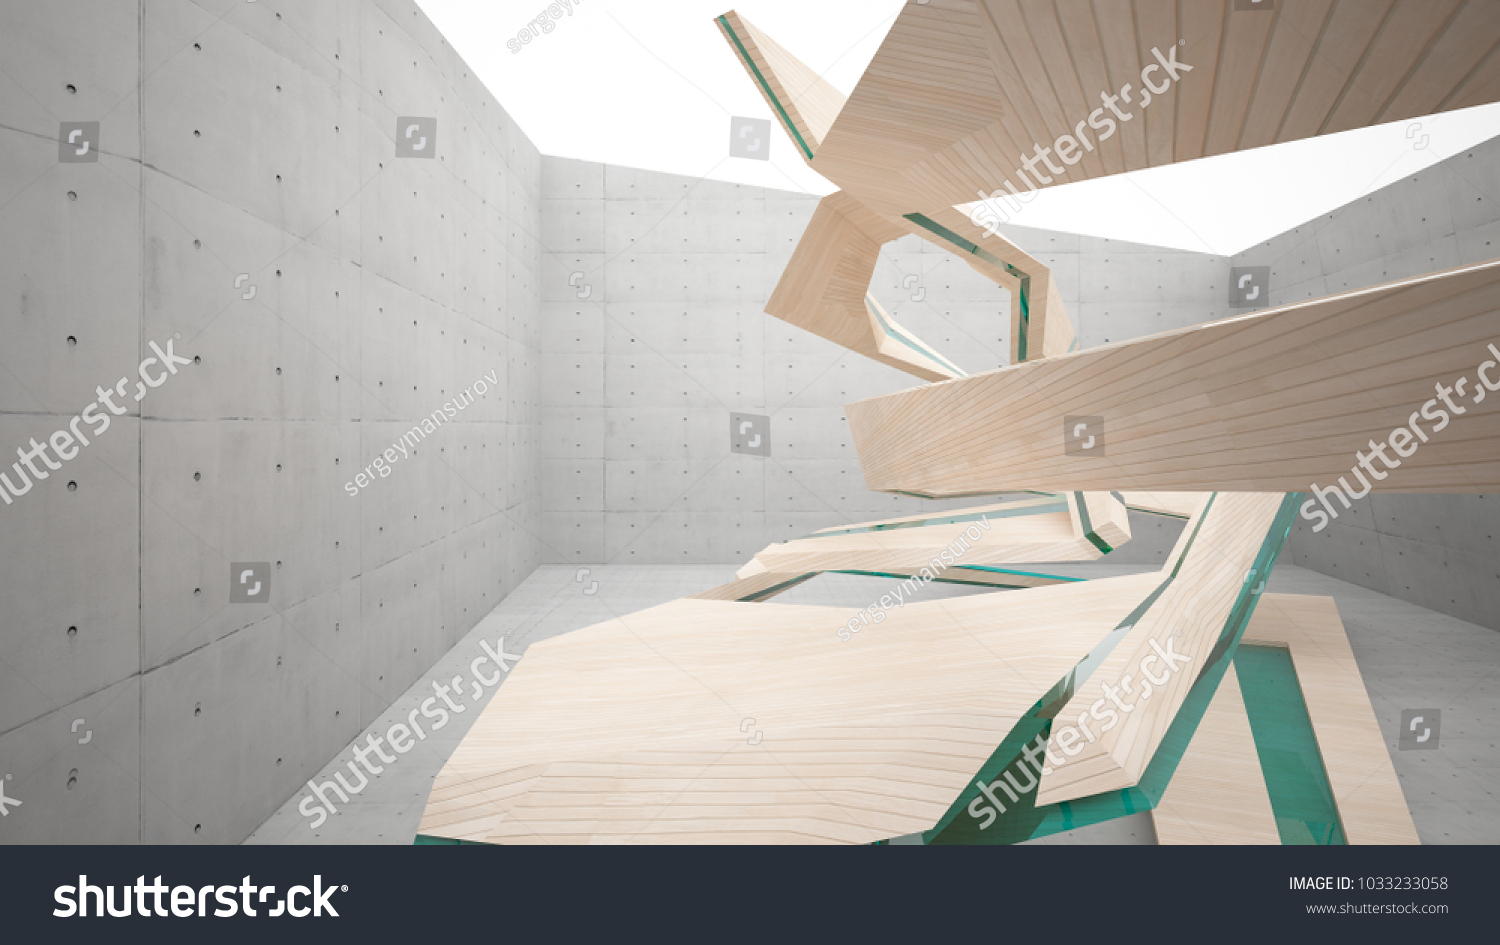 Abstract  concrete and wood parametric interior  with window. 3D illustration and rendering. #1033233058